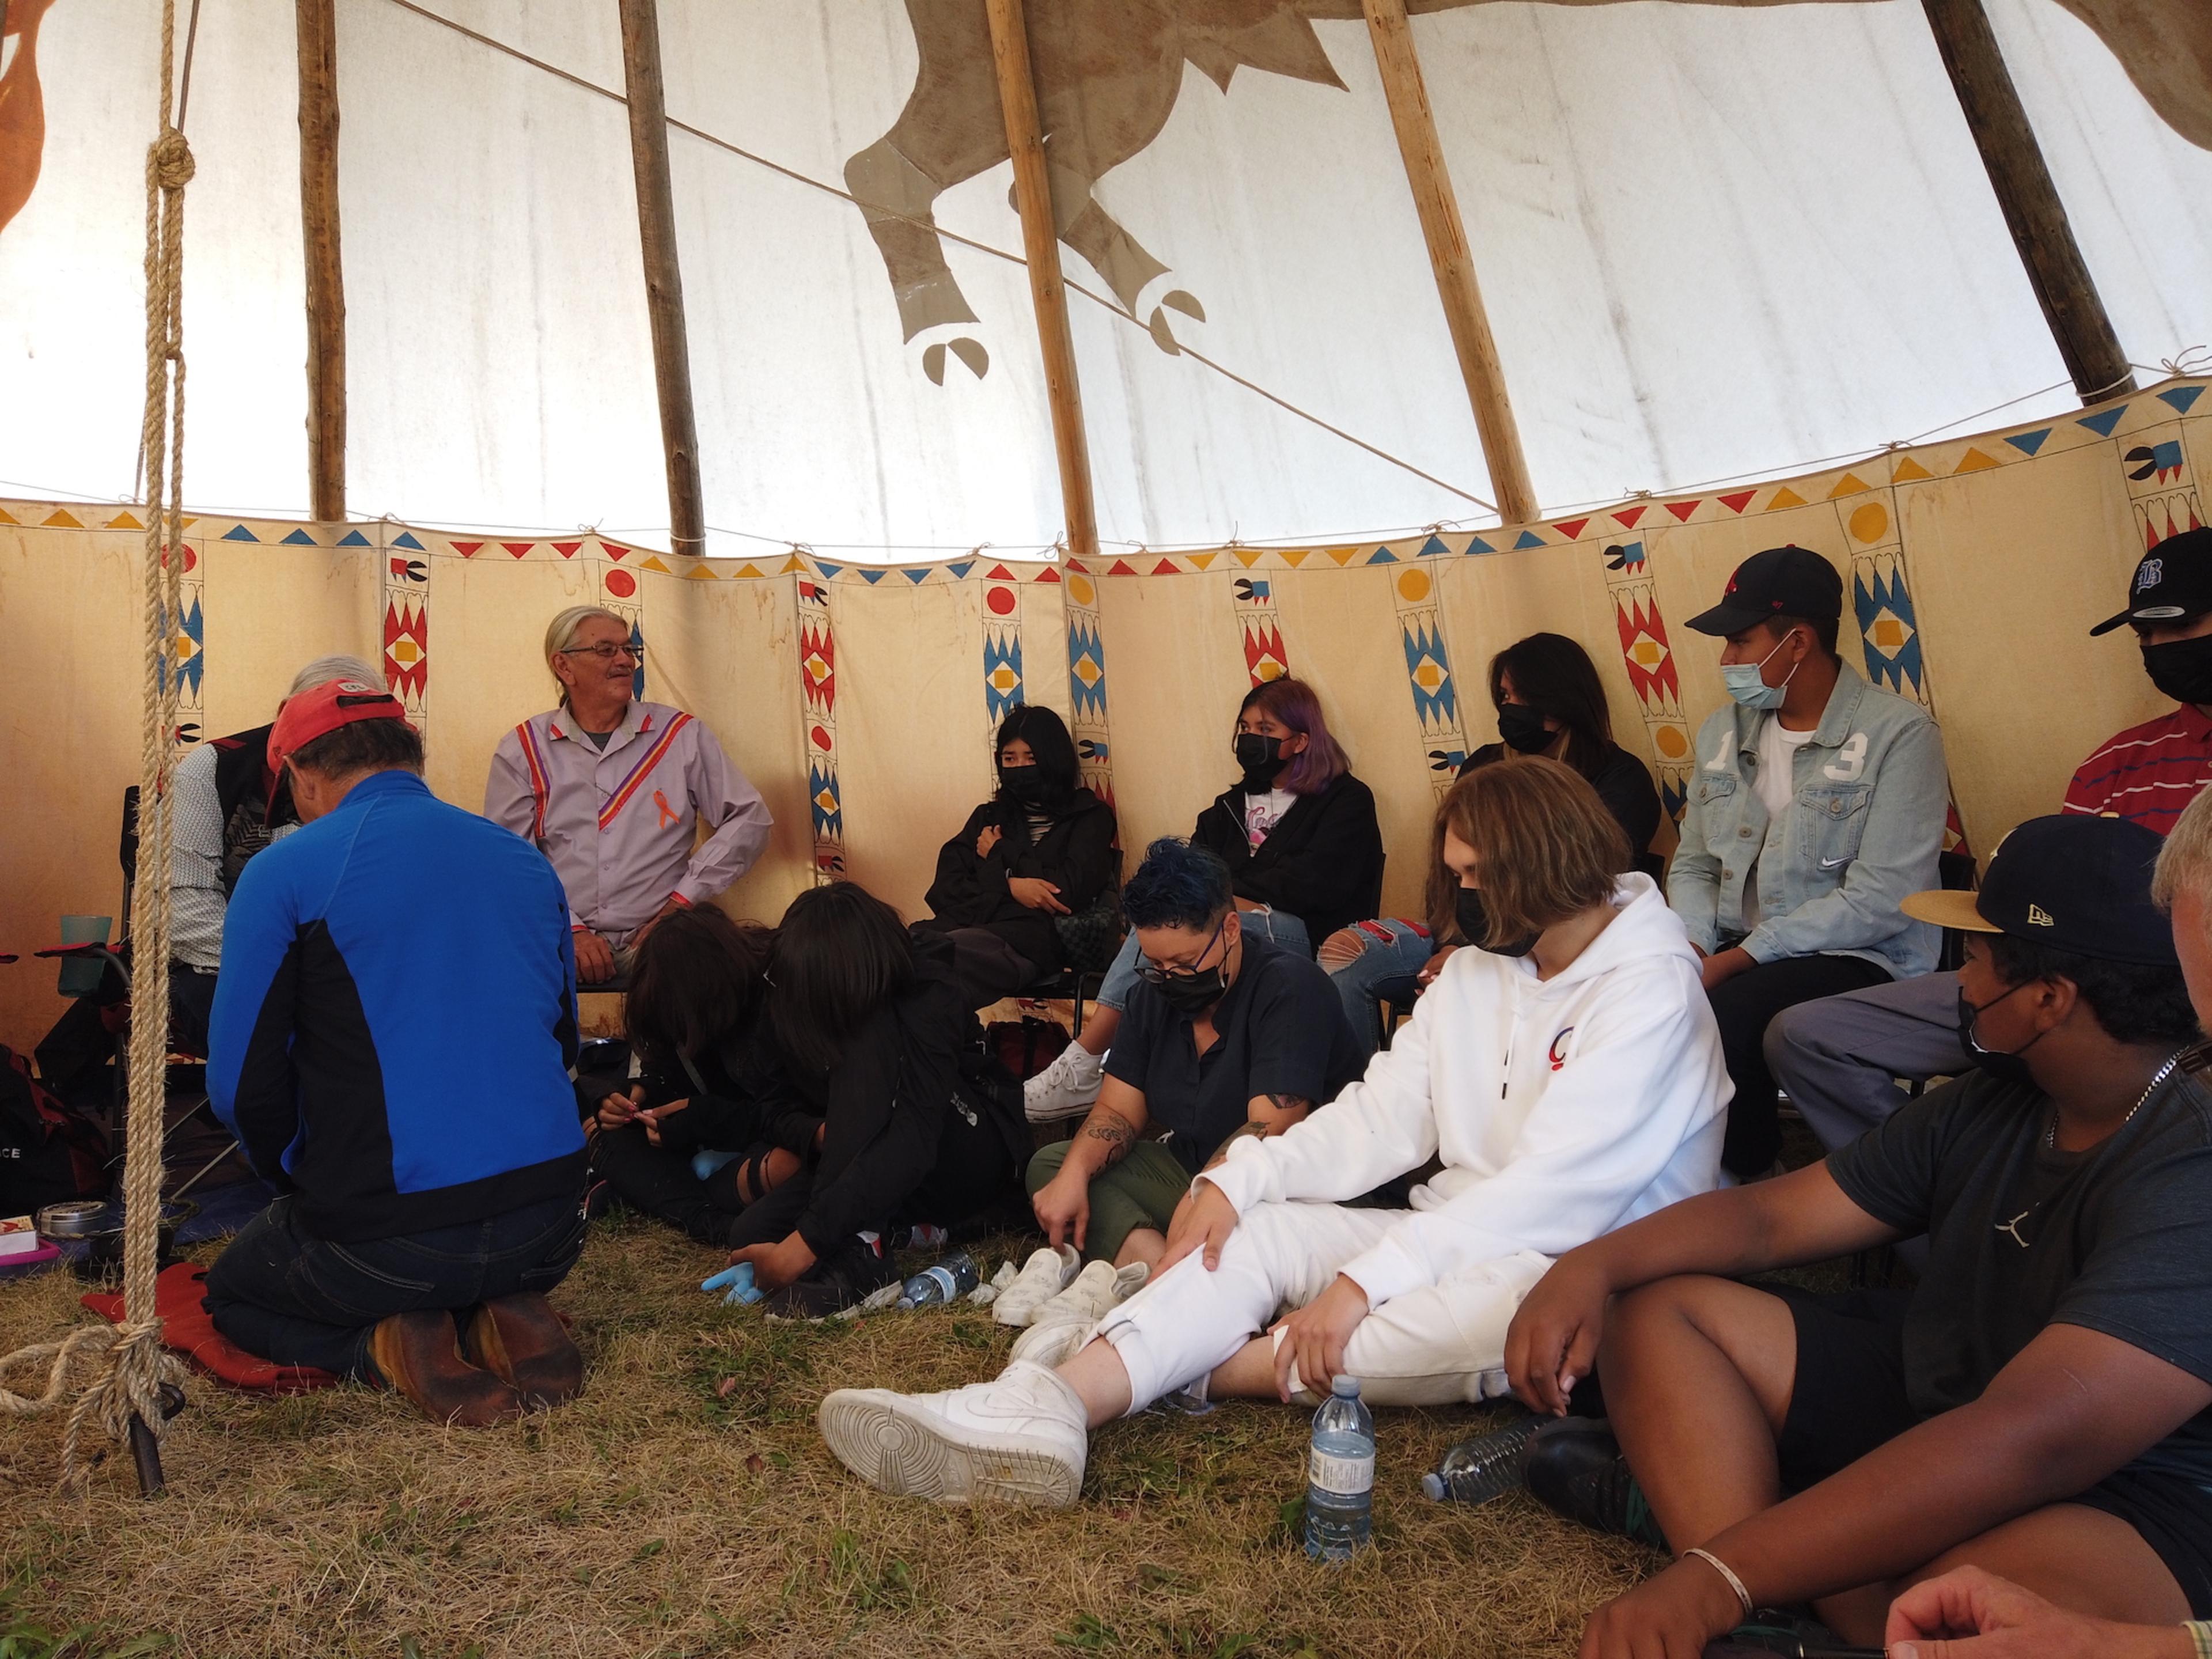 People gather in a tent